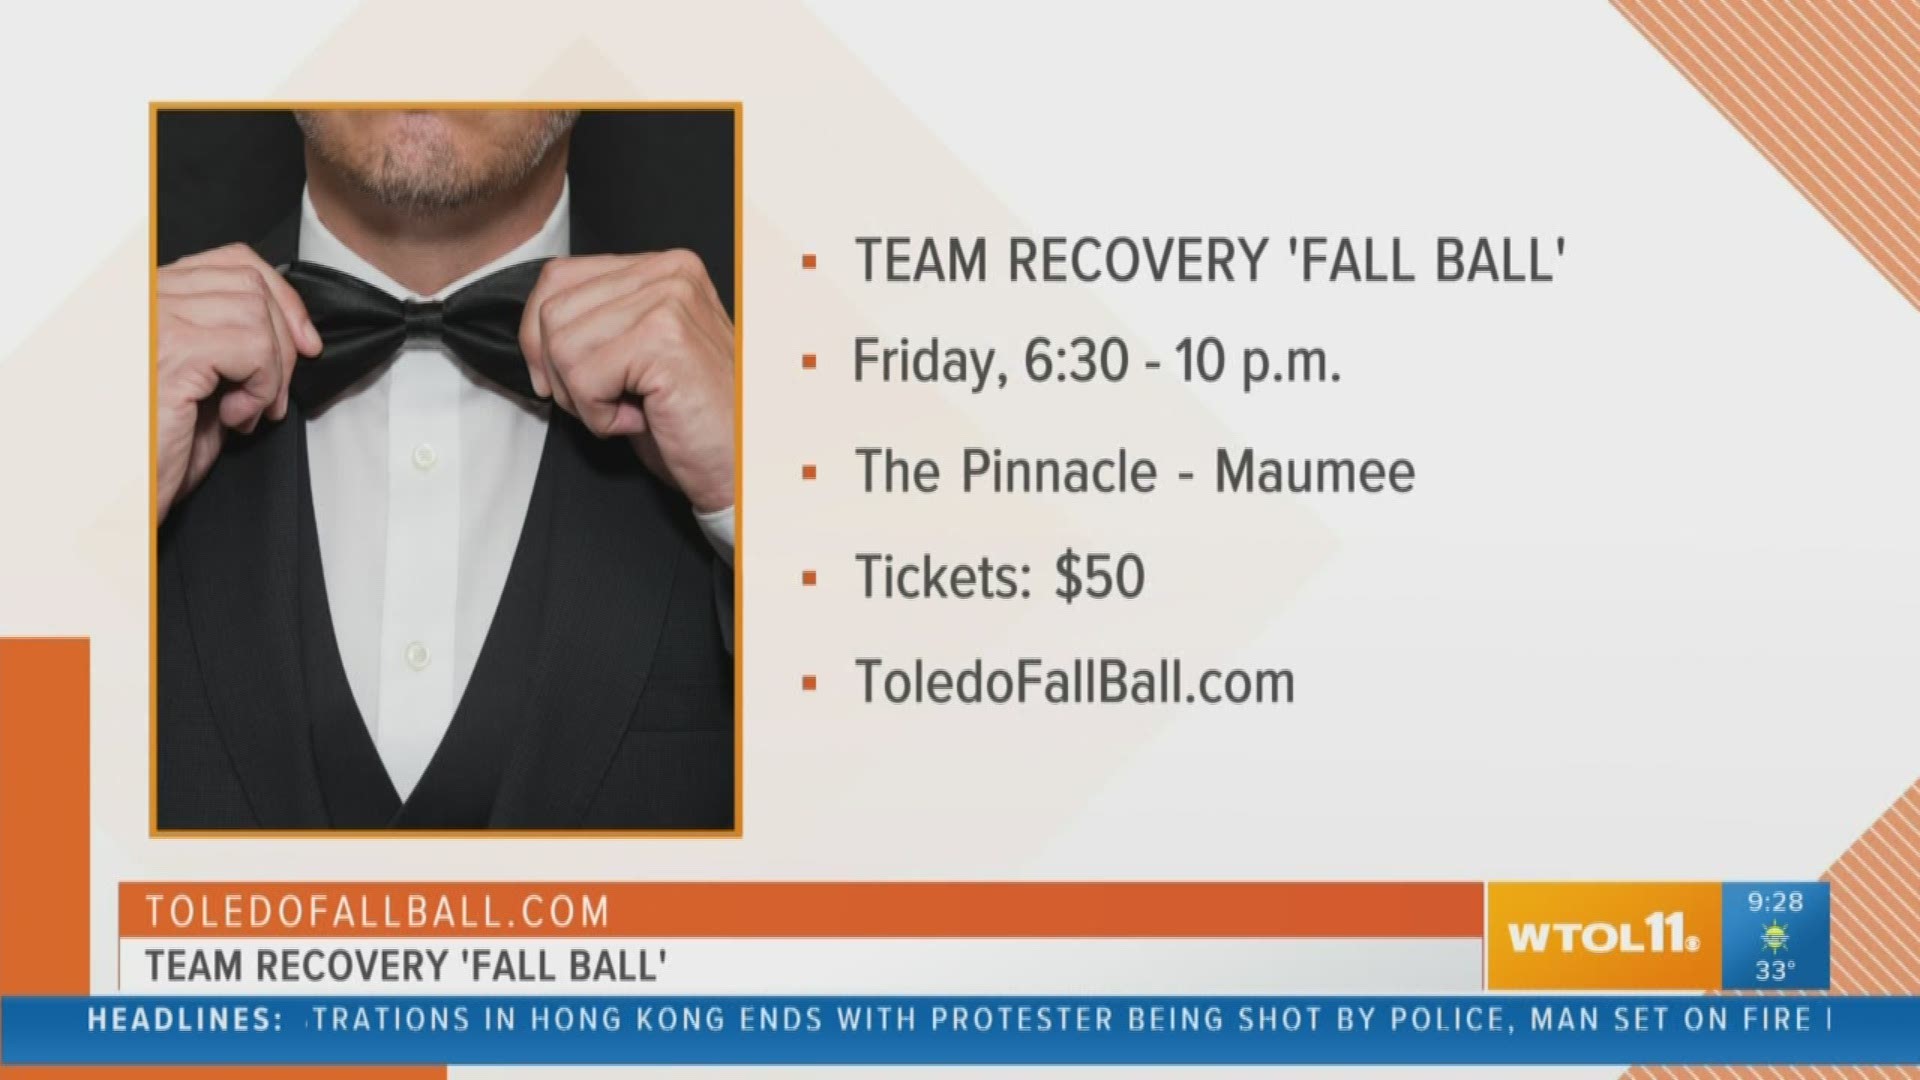 Help folks battling addiction by attending the 'Fall Ball' Friday night at The Pinnacle in Maumee. Tickets cost $50. The event lasts from 6:30 until 10 p.m.